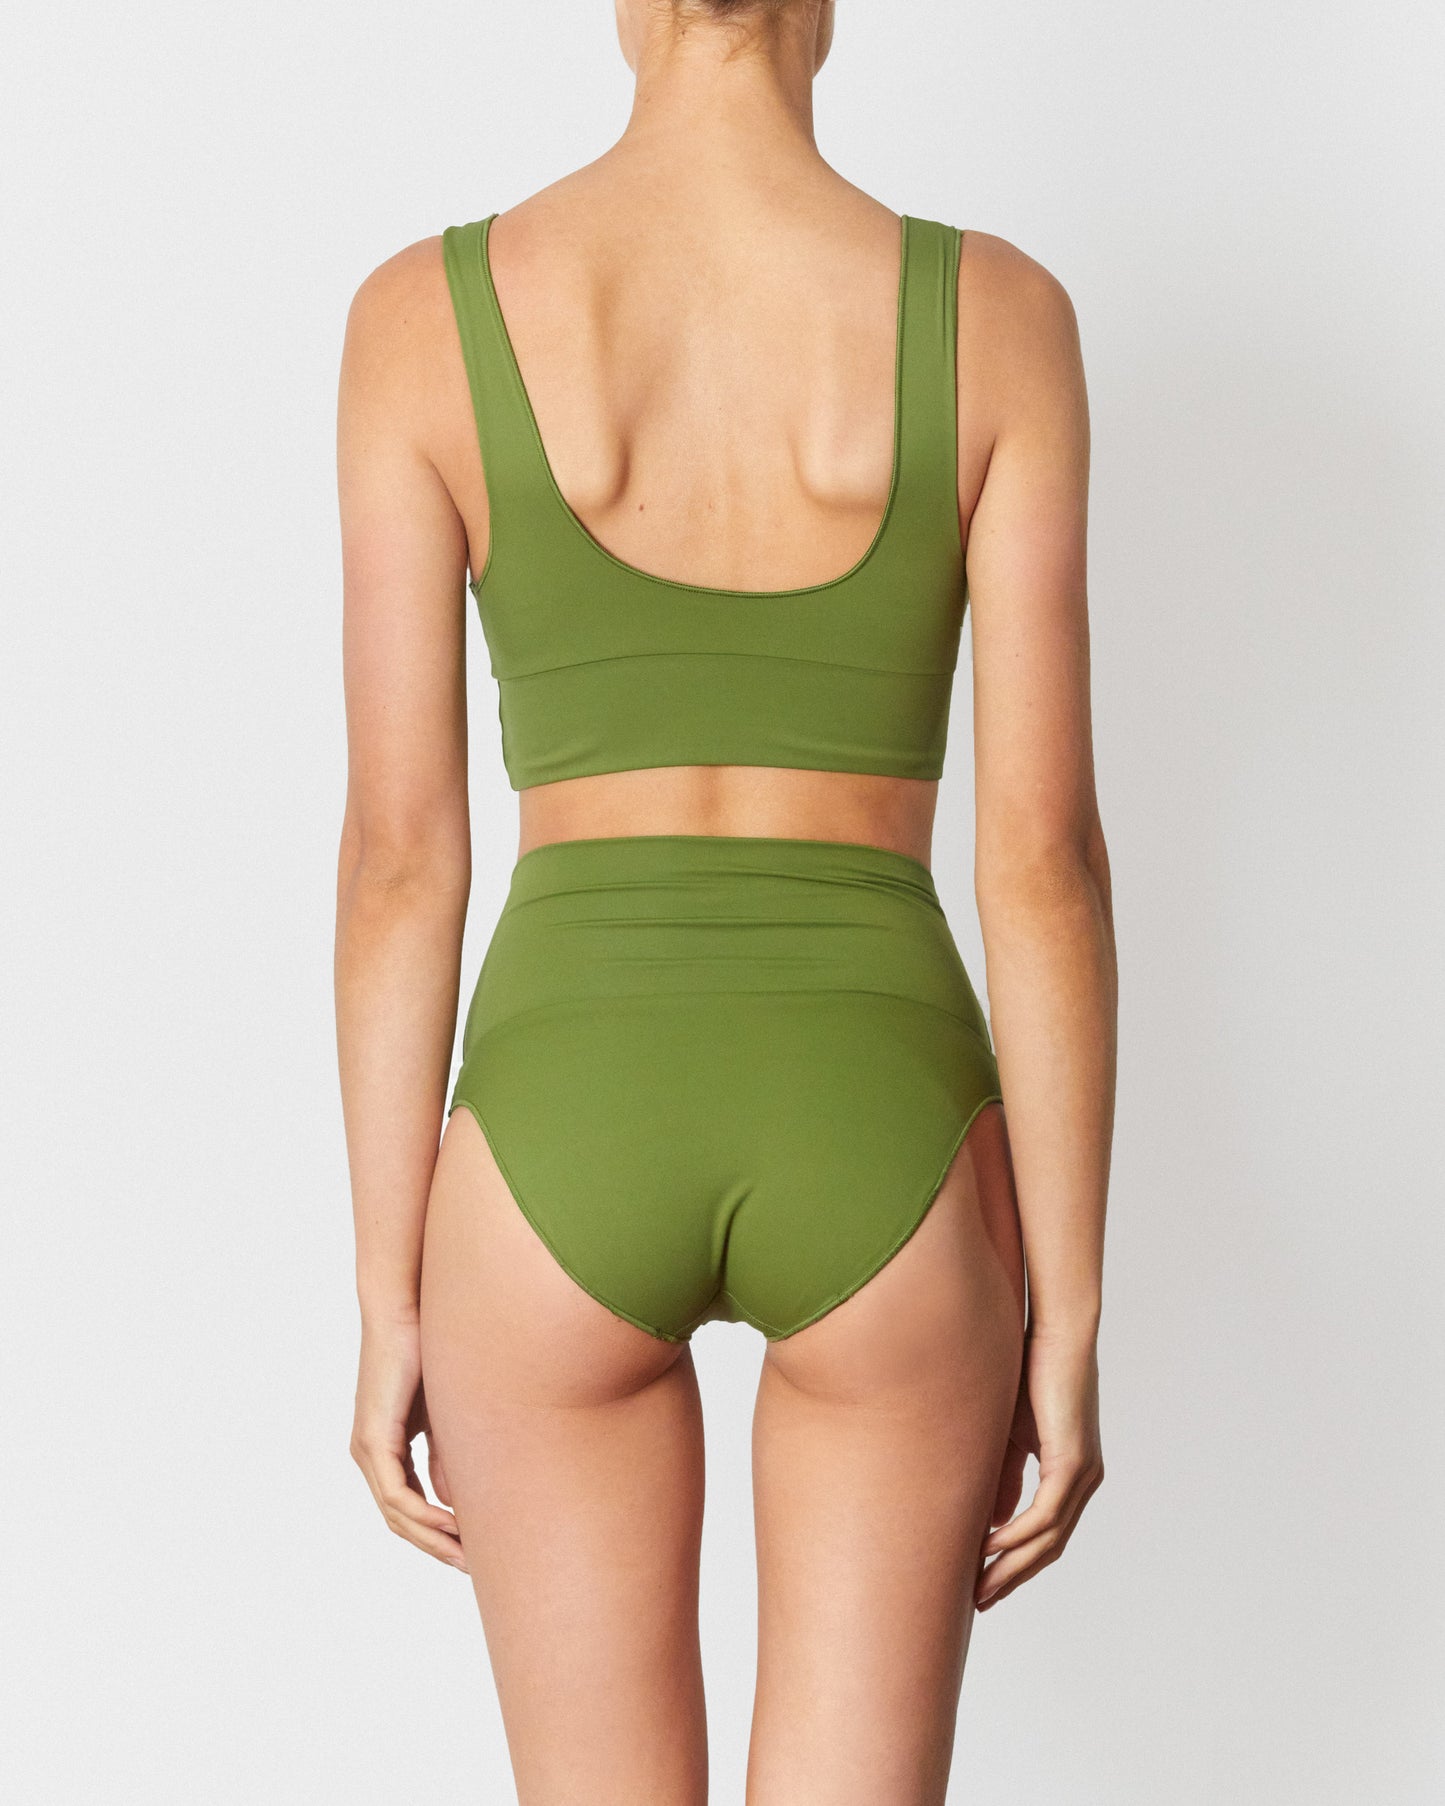 On body back of the Contour Crop Top - Pesto